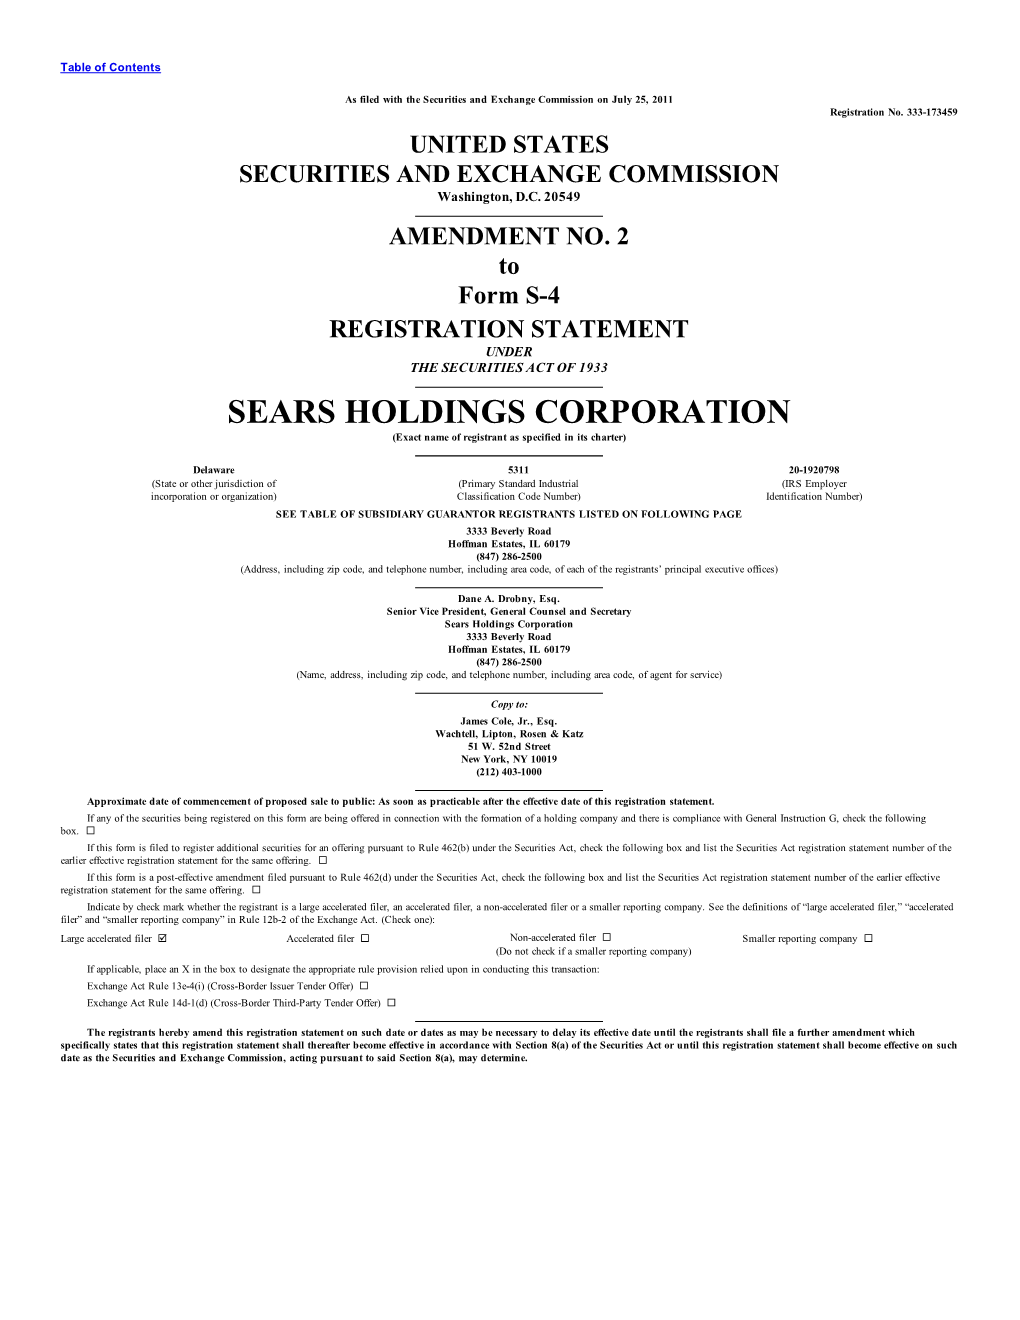 SEARS HOLDINGS CORPORATION (Exact Name of Registrant As Specified in Its Charter)